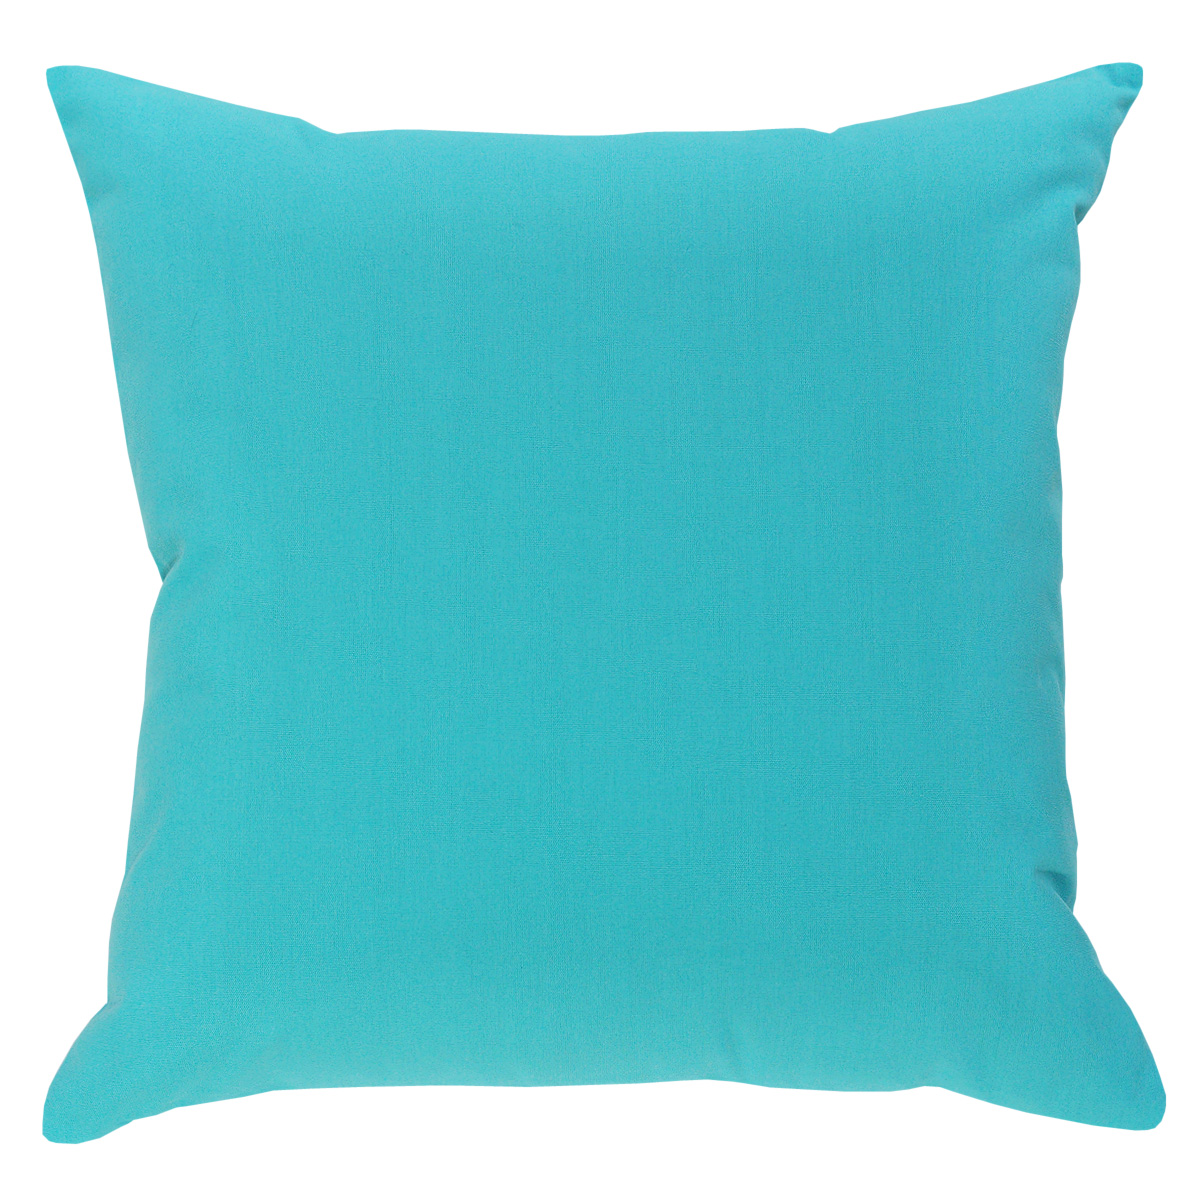 Dyed-Solid Ocean Outdoor Cushion - 45x45cm